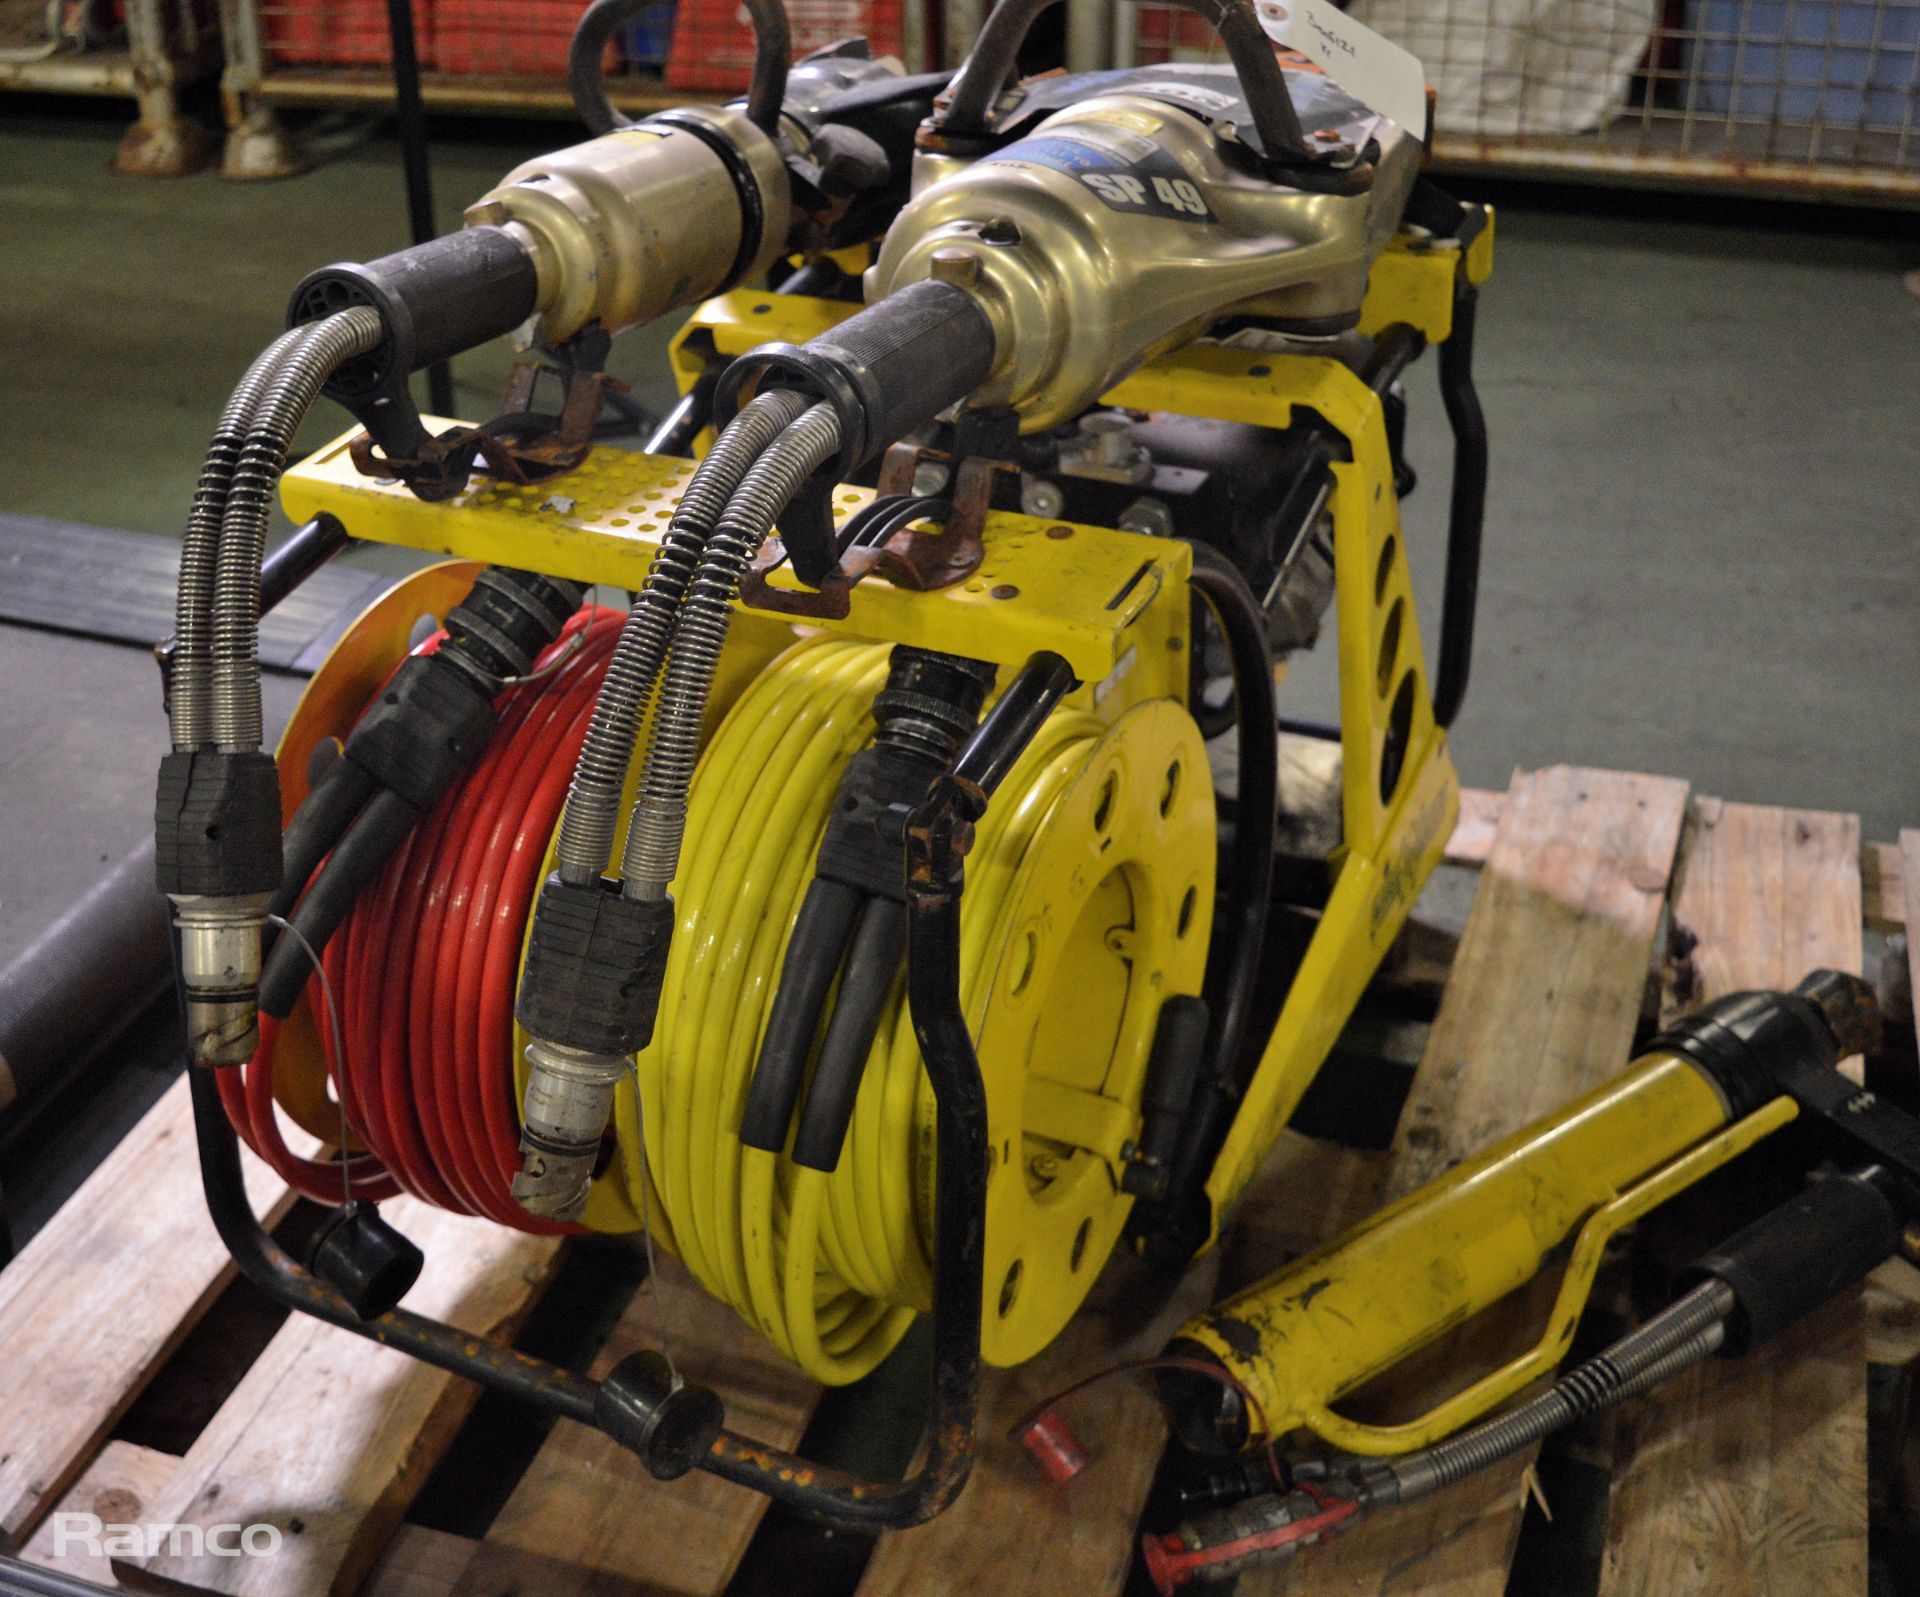 Weber Hydraulic Rescue Equipment & Accessories - Cutter, Spreader, Ram, Power pack & hoses - Image 4 of 9